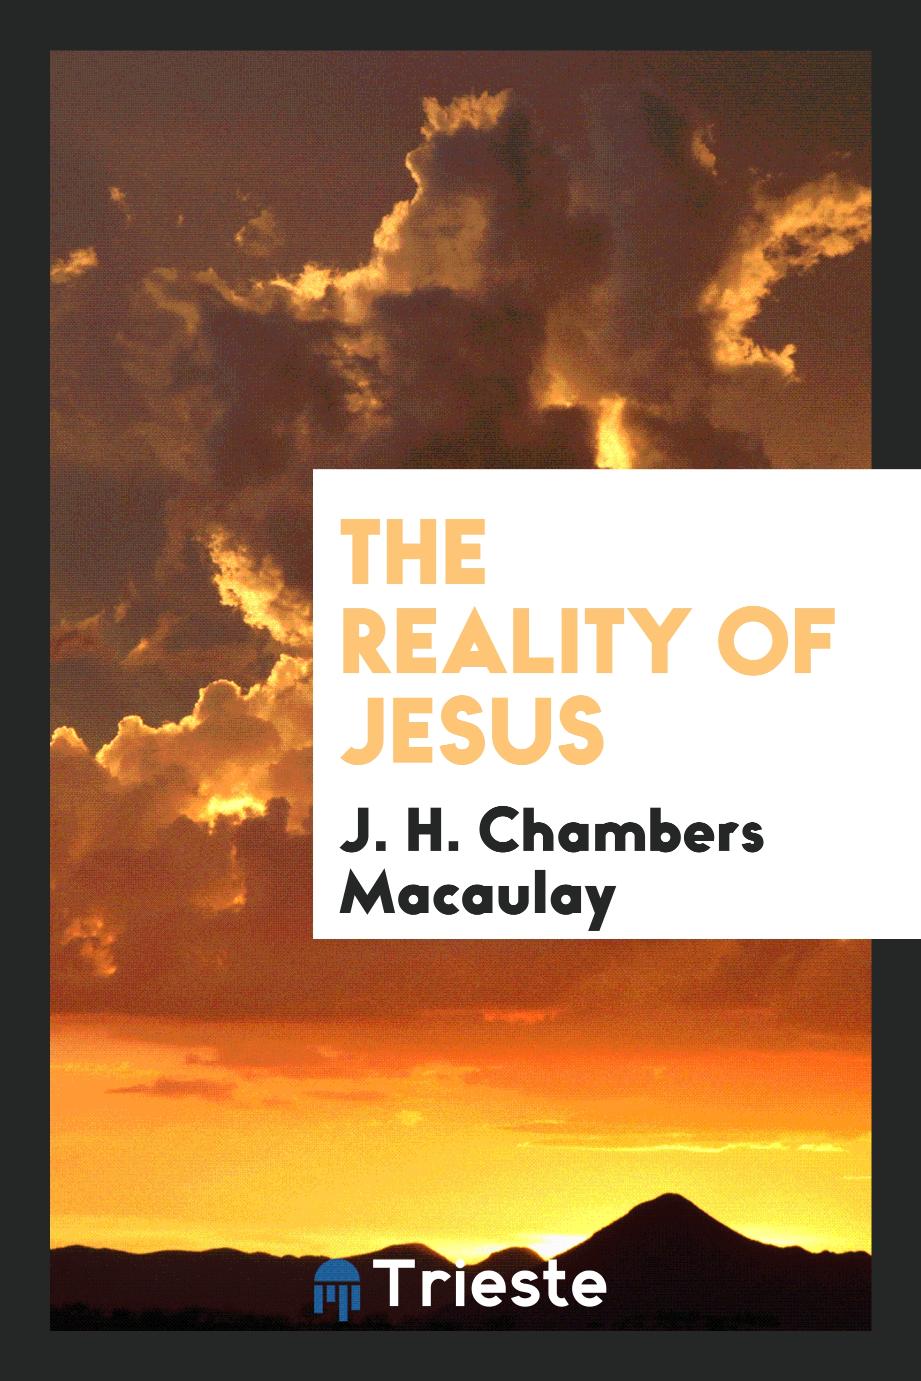 The reality of Jesus